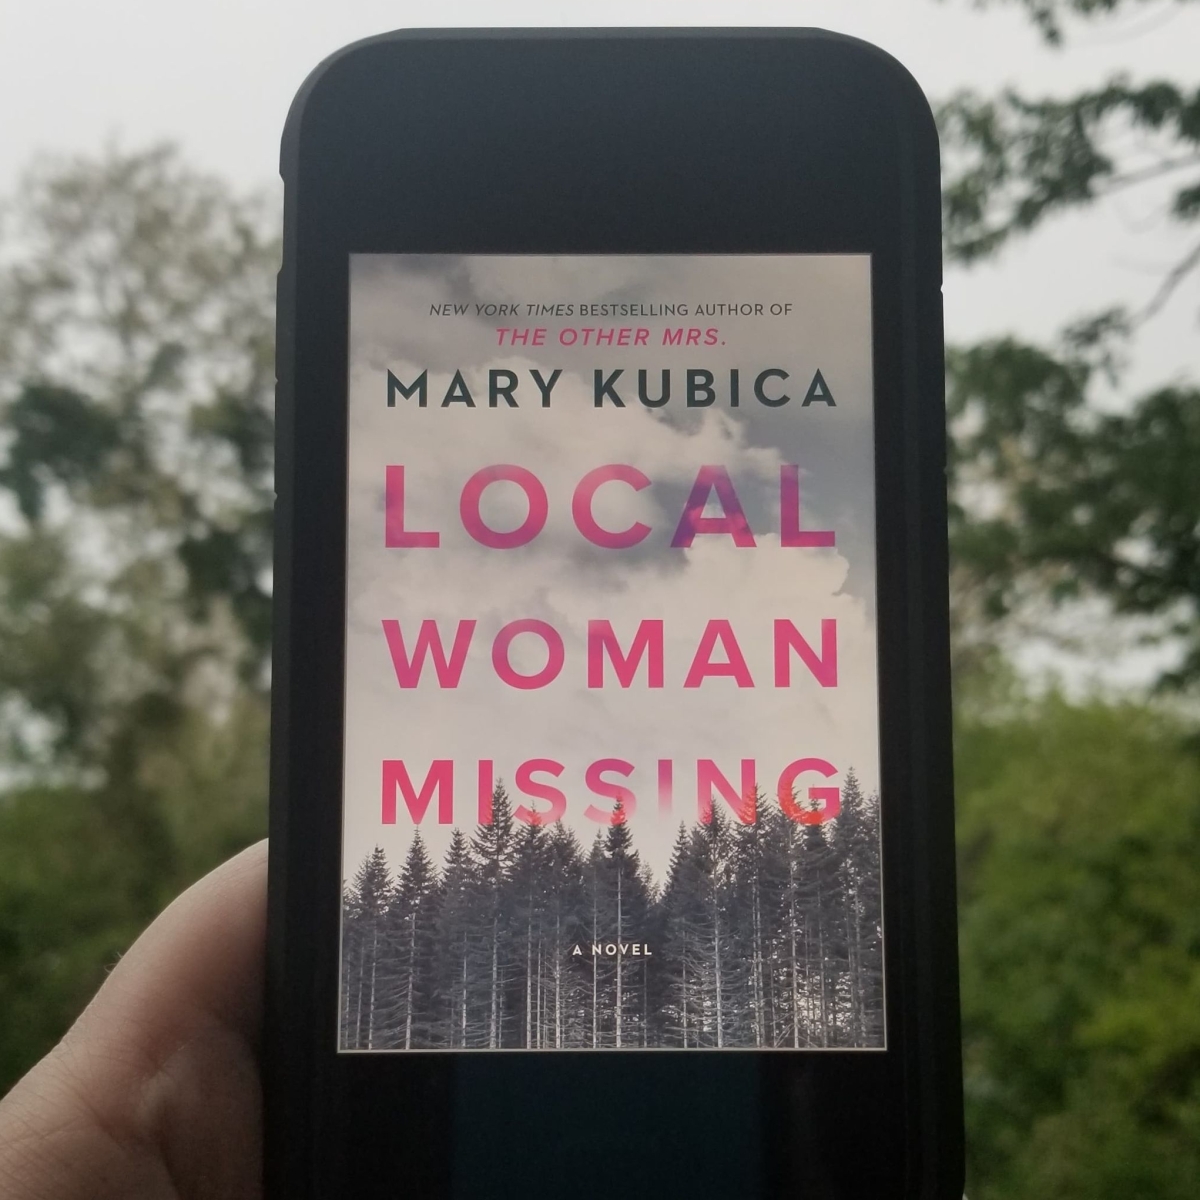 Chilling Summer: Mary Kubica’s “Local Woman Missing”